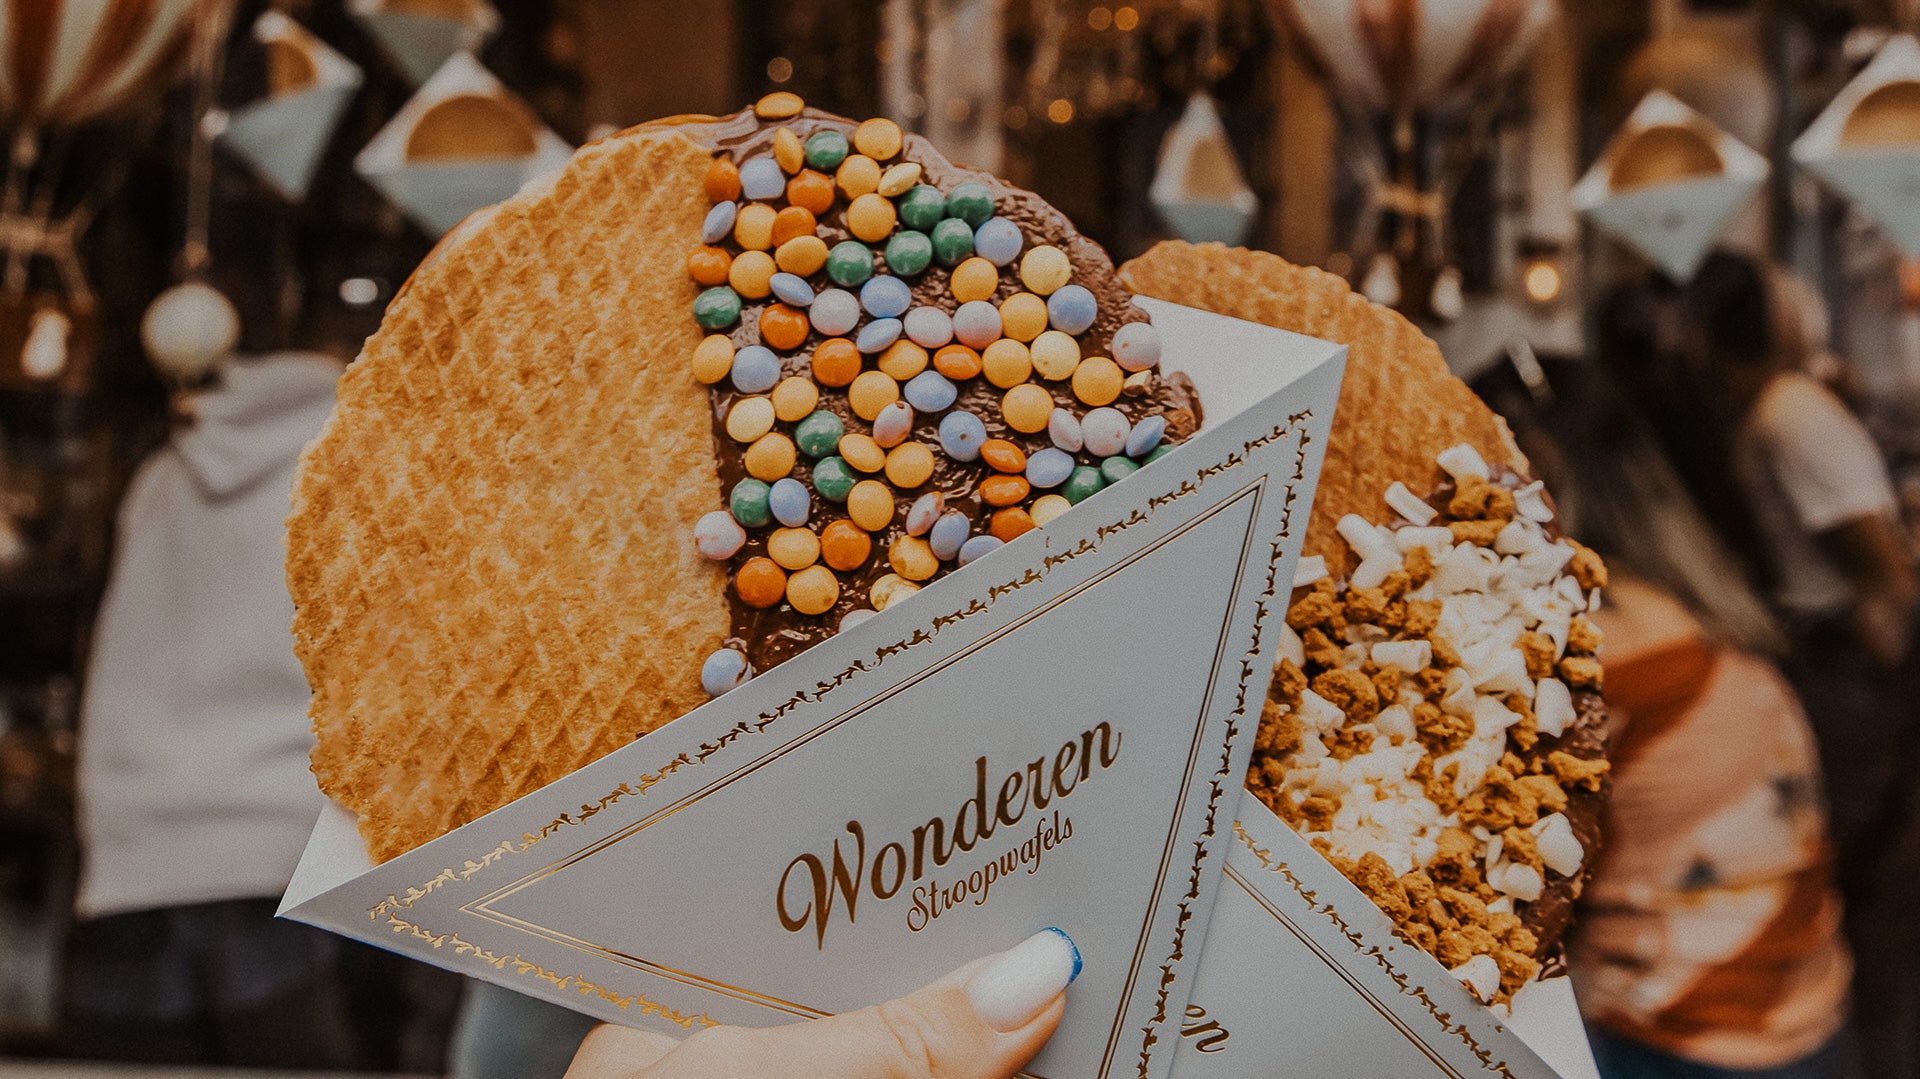 A close-up of two hands holding a Wonderen Stroopwafel, each wafel generously topped with colorful treats. The left one is covered with a vibrant mix of multi-colored coated chocolates, while the right one is sprinkled with white mini marshmallows and crumbled biscuit. They are presented in branded Wonderen Stroopwafels sleeves with elegant gold detailing. In the blurred background, the warm ambiance of the store with its lighting and other customers is visible.